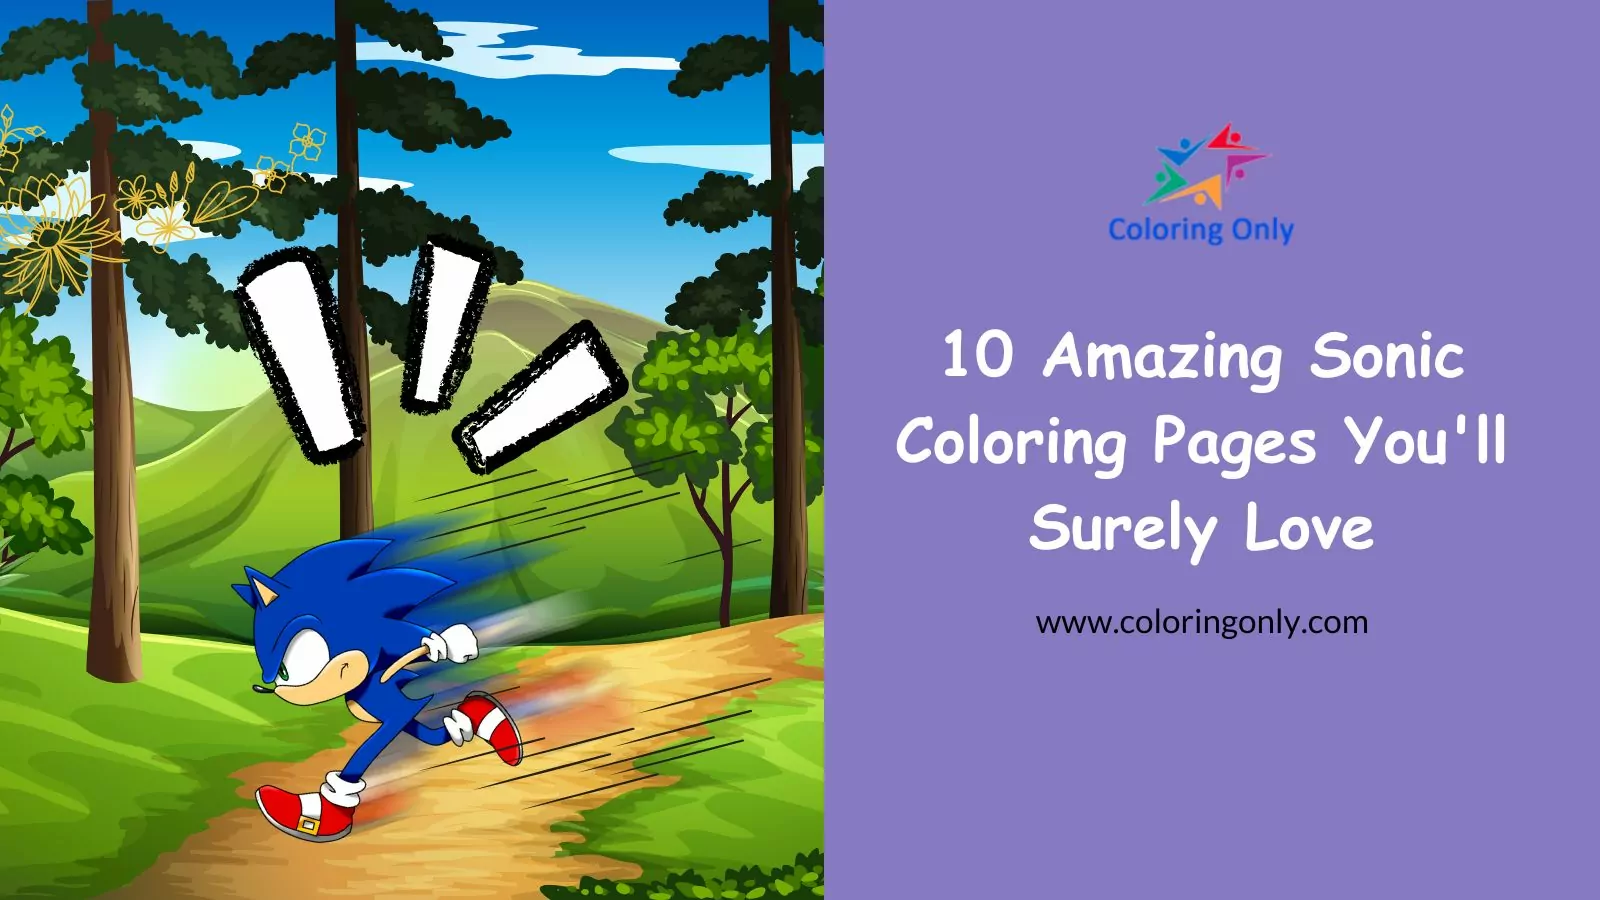 10 Amazing Sonic Coloring Pages You’ll Surely Love